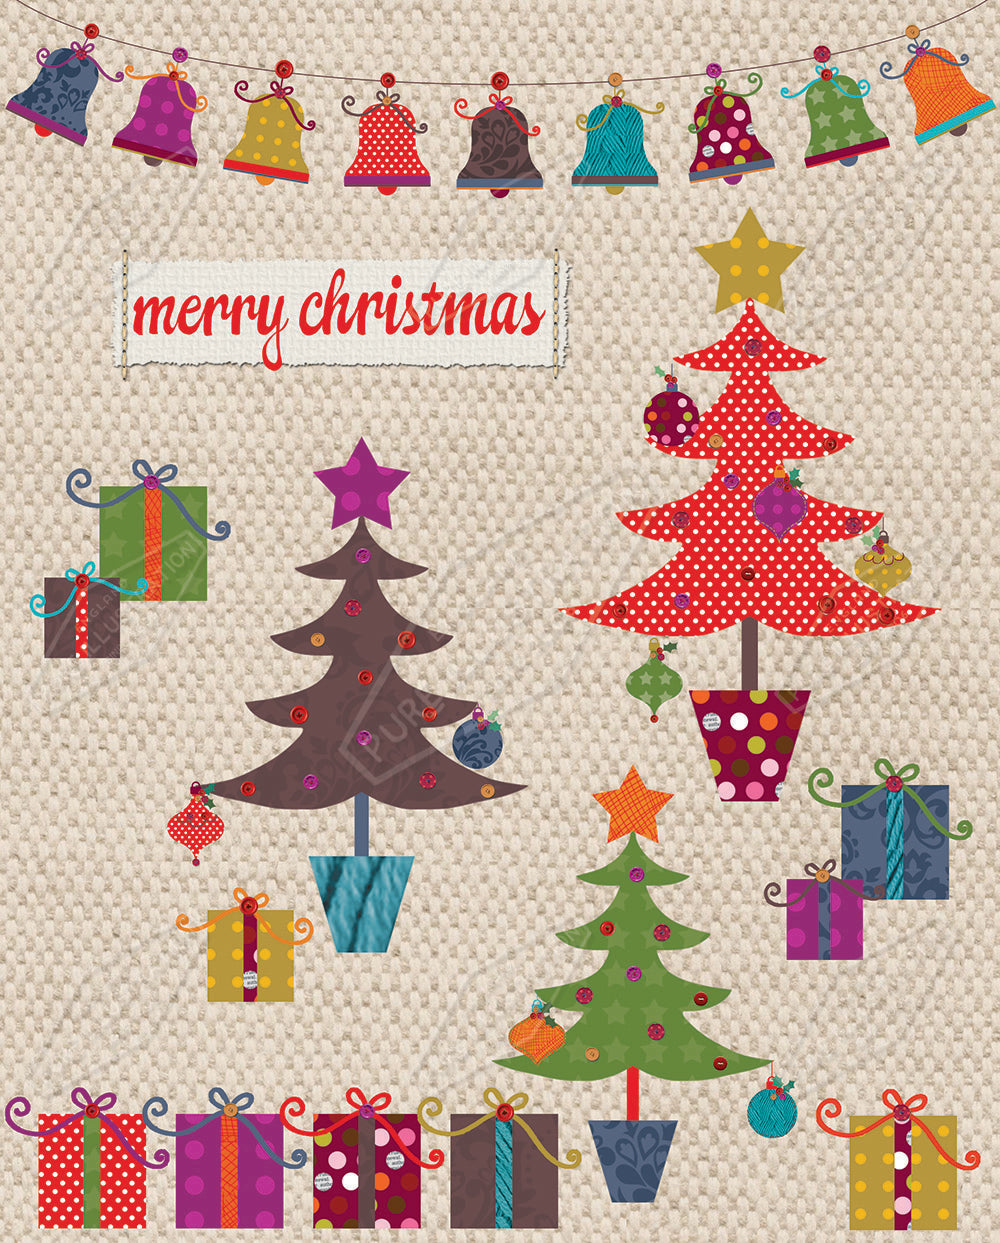 00032210KSP- Kerry Spurling is represented by Pure Art Licensing Agency - Christmas Greeting Card Design